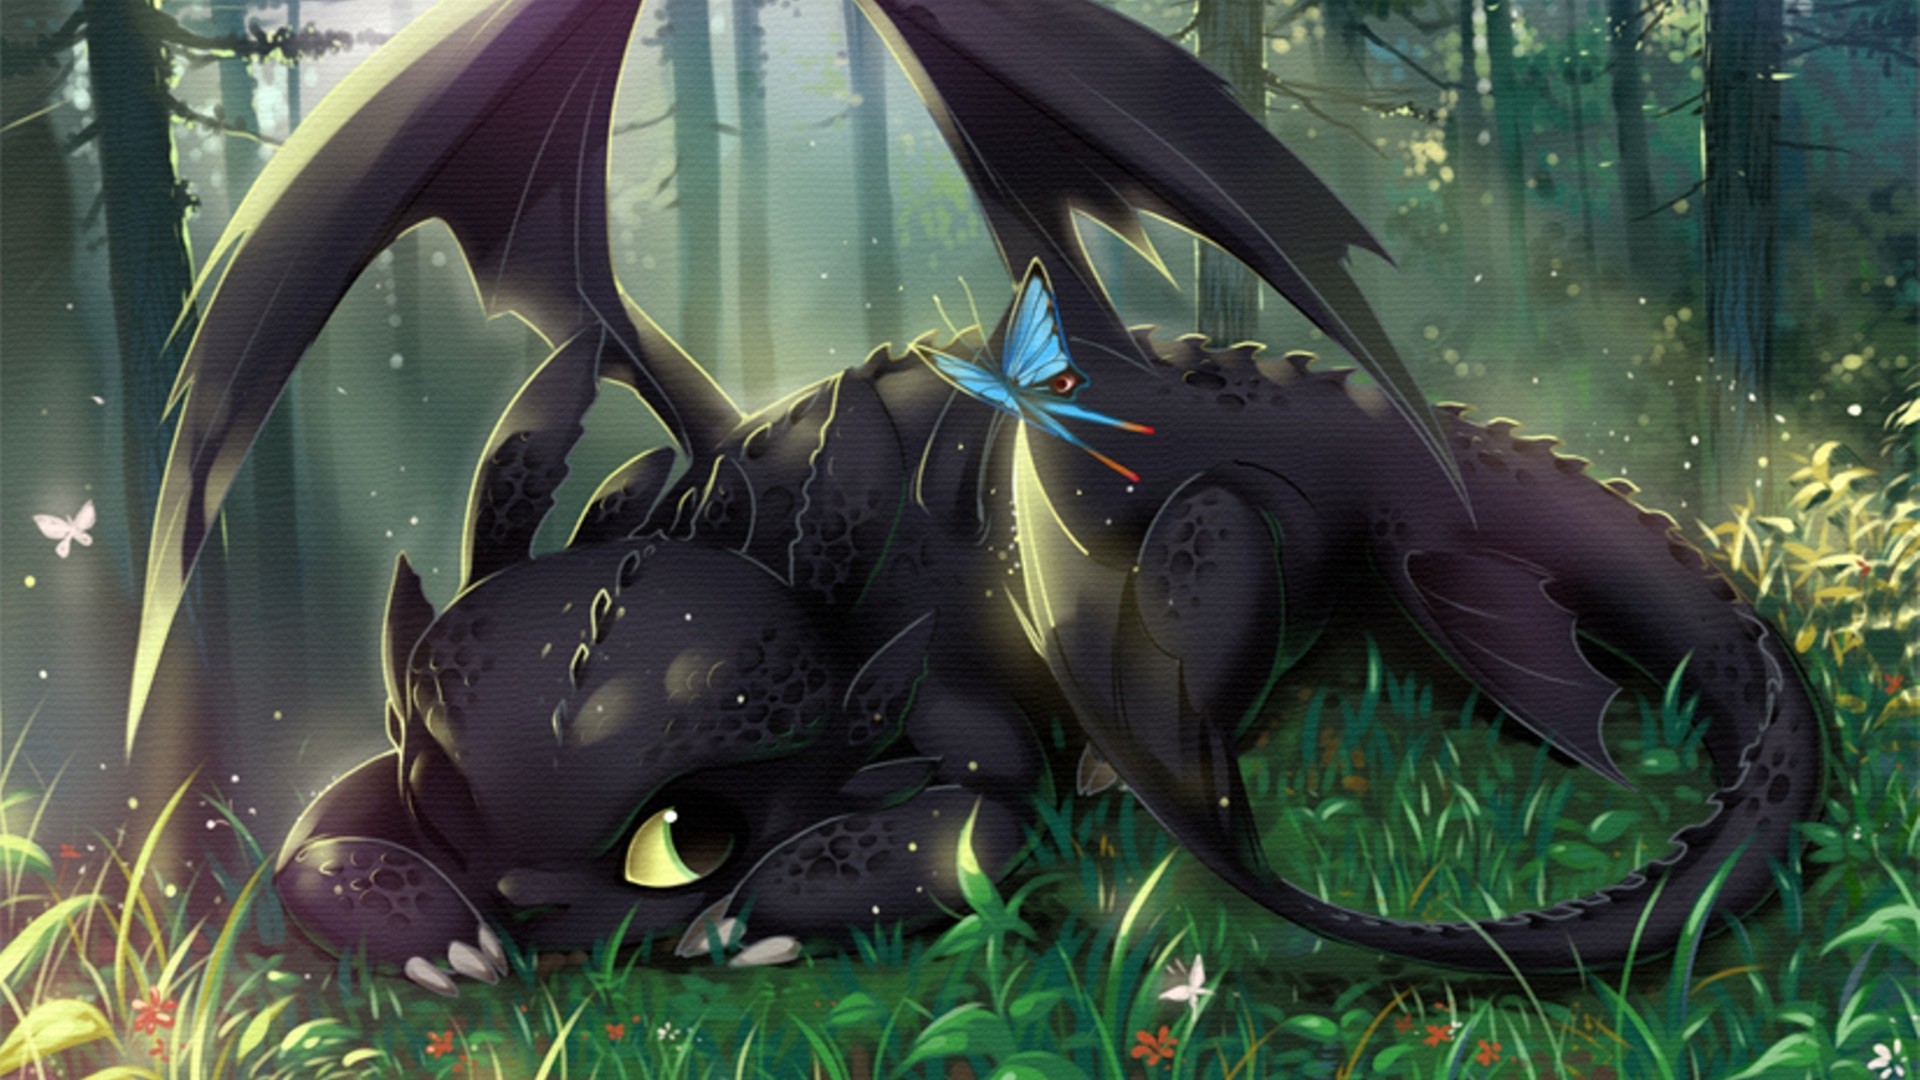 How To Train Your Dragon Toothless Wallpapers Hd Desktop And Mobile Backgrounds 1920x1080